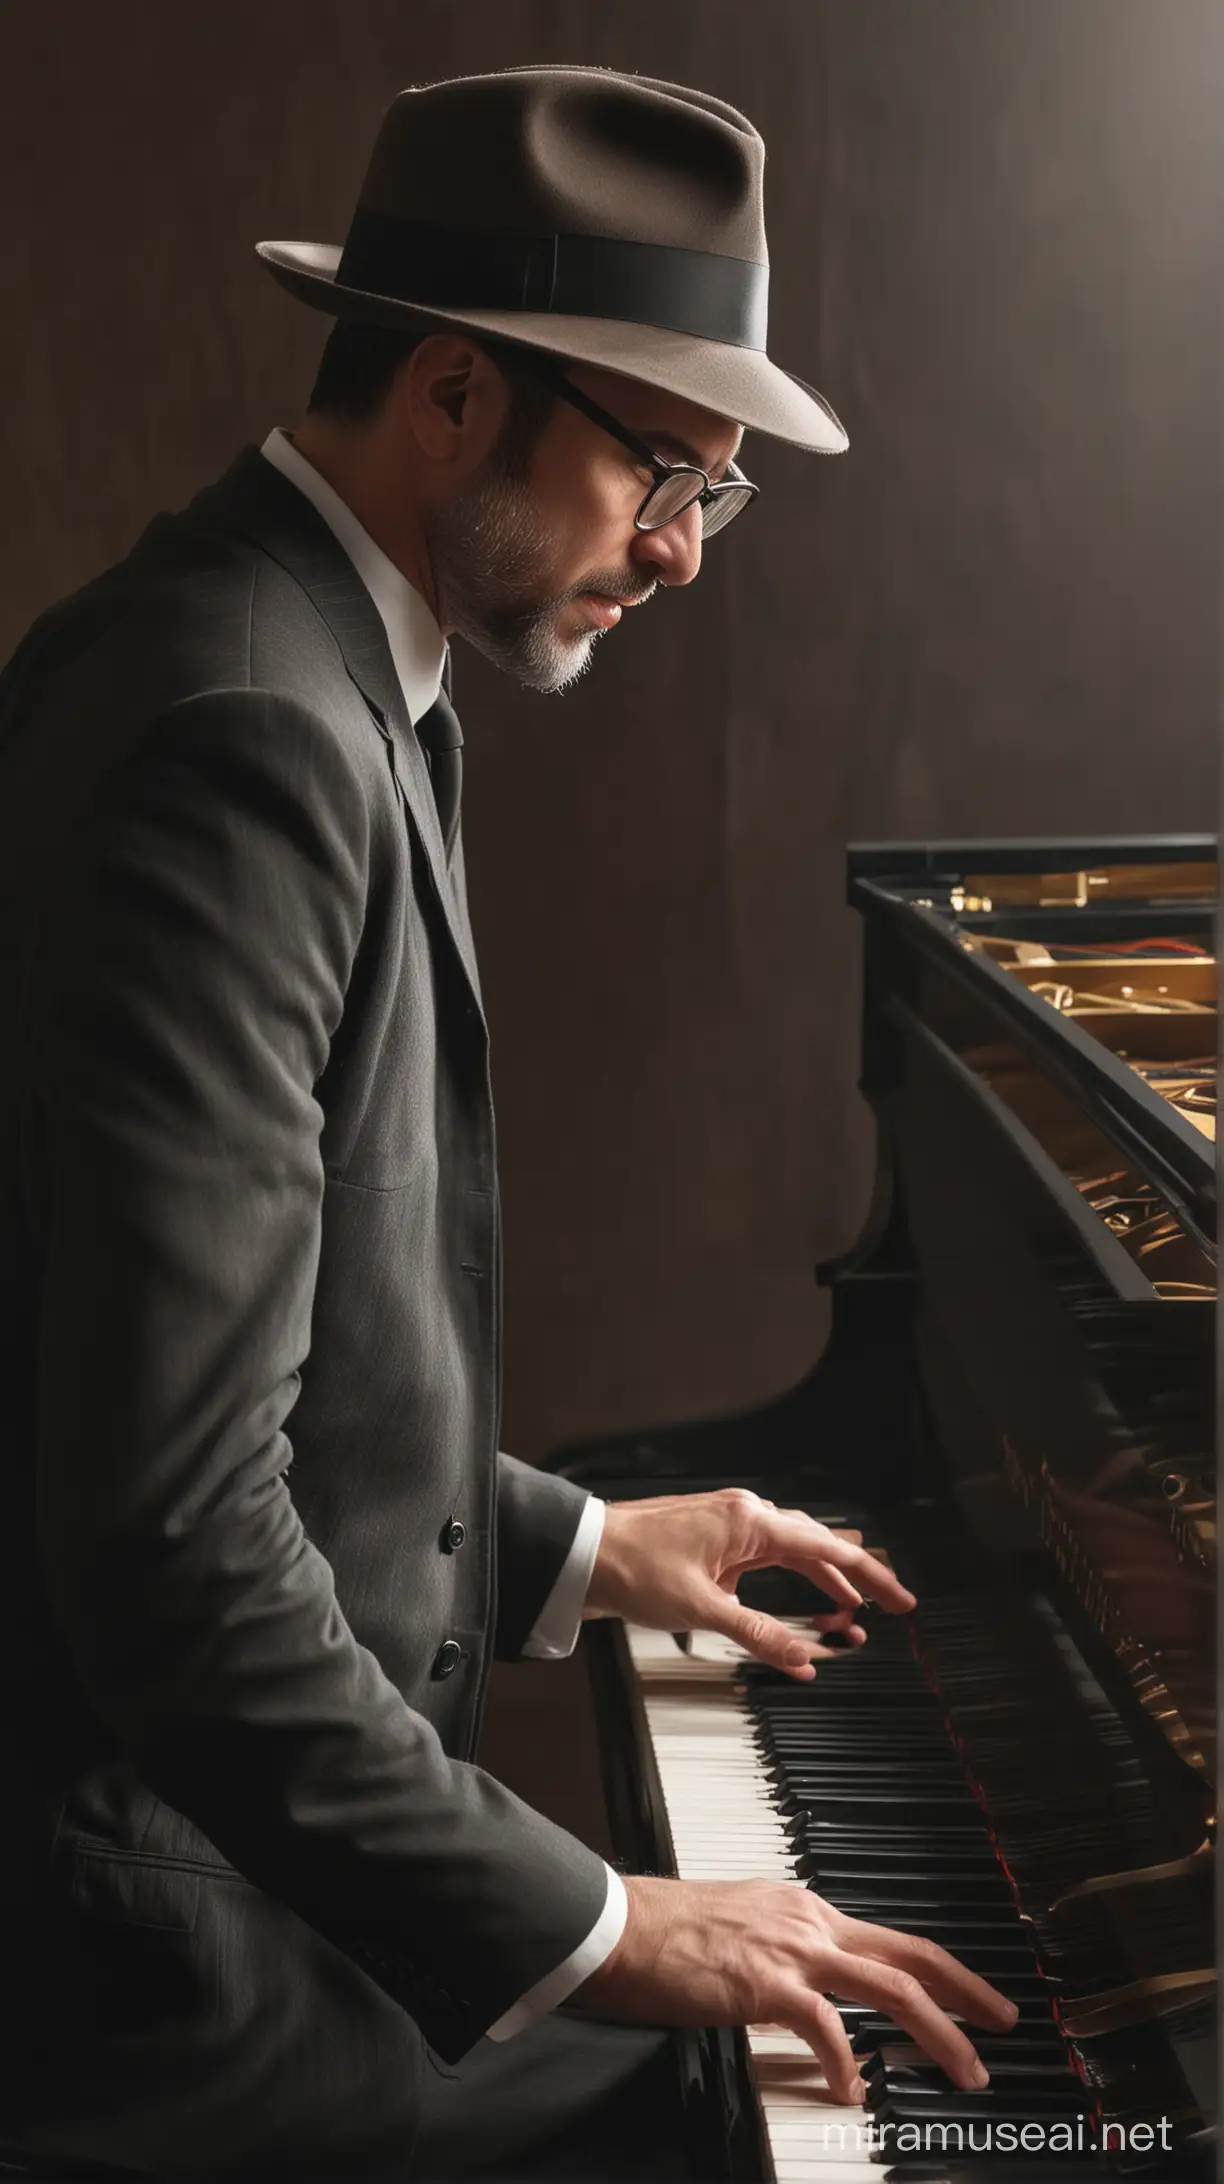 46 year old man, wearing glasses, wearing a fedora hat, playing the grand piano while singing sadly, facing the audience in front, full body, details.